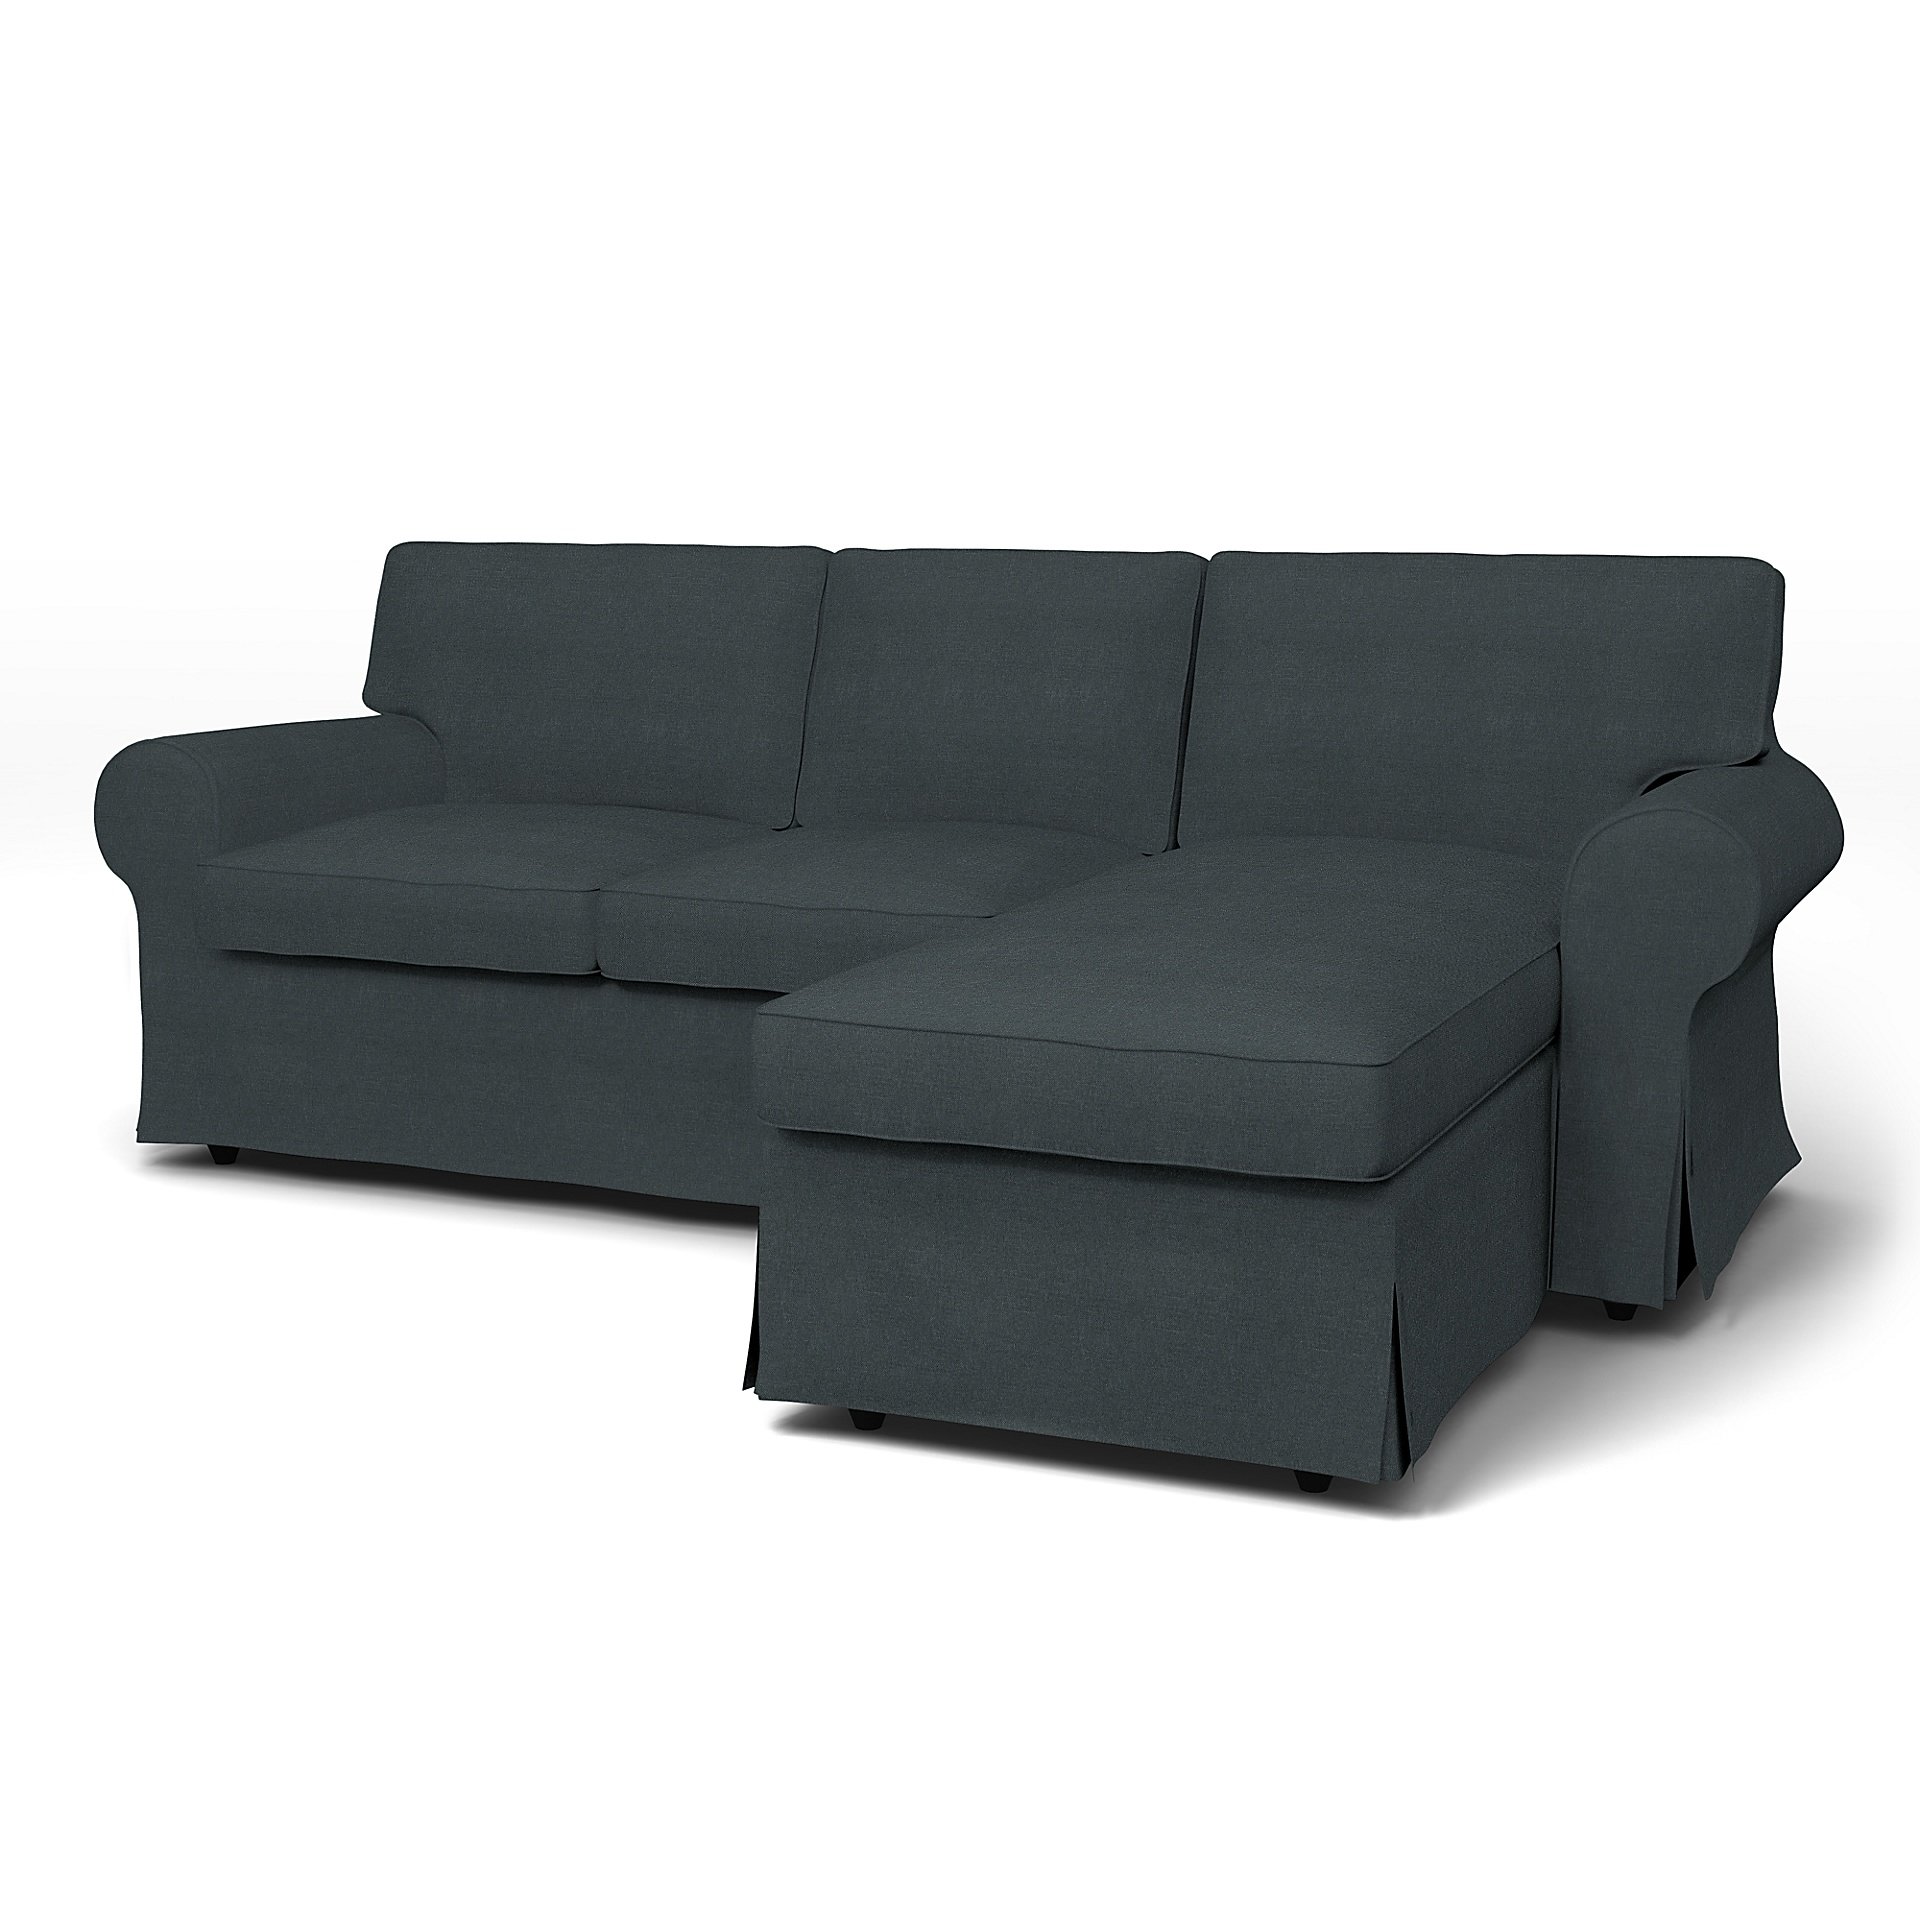 IKEA - Ektorp 3 Seater Sofa with Chaise Cover, Graphite Grey, Linen - Bemz